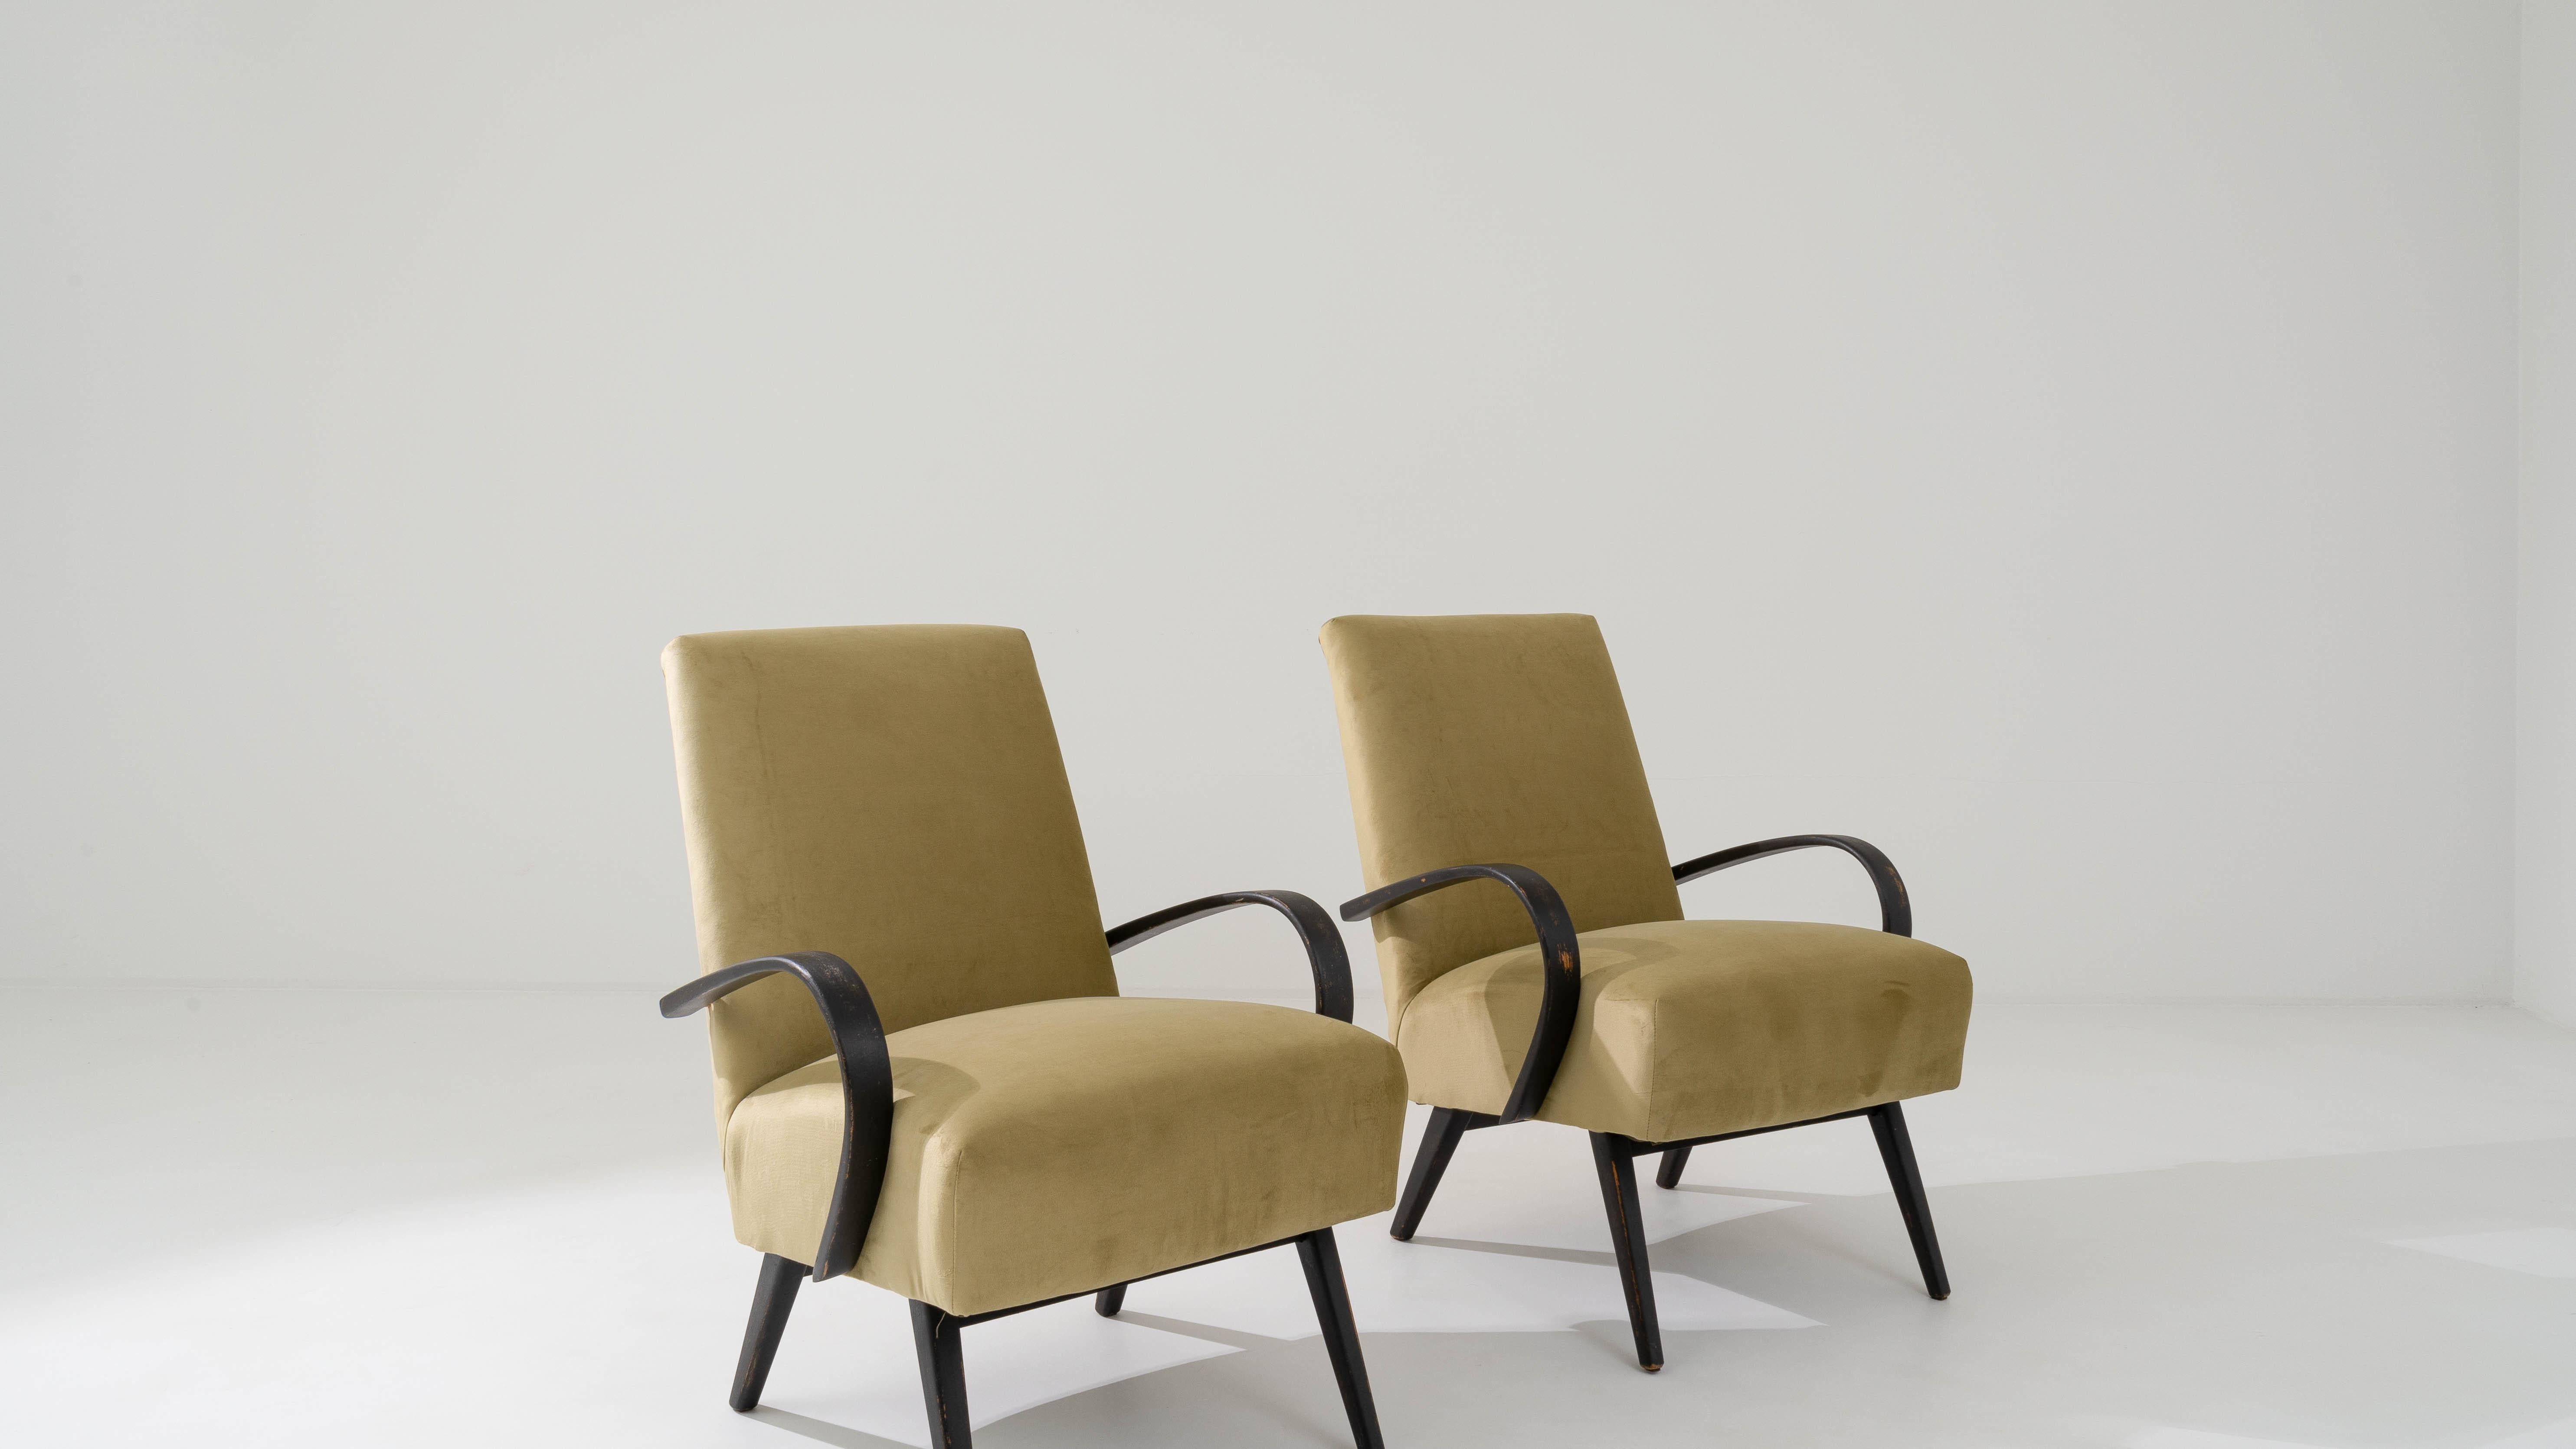 Produced in the former Czechoslovakia, this pair of bentwood armchairs from circa 1950 are re-upholstered with an updated neutral fabric. The velvety upholstery was chosen to compliment the vintage elegance of the black hardwood frame, ochre yellow